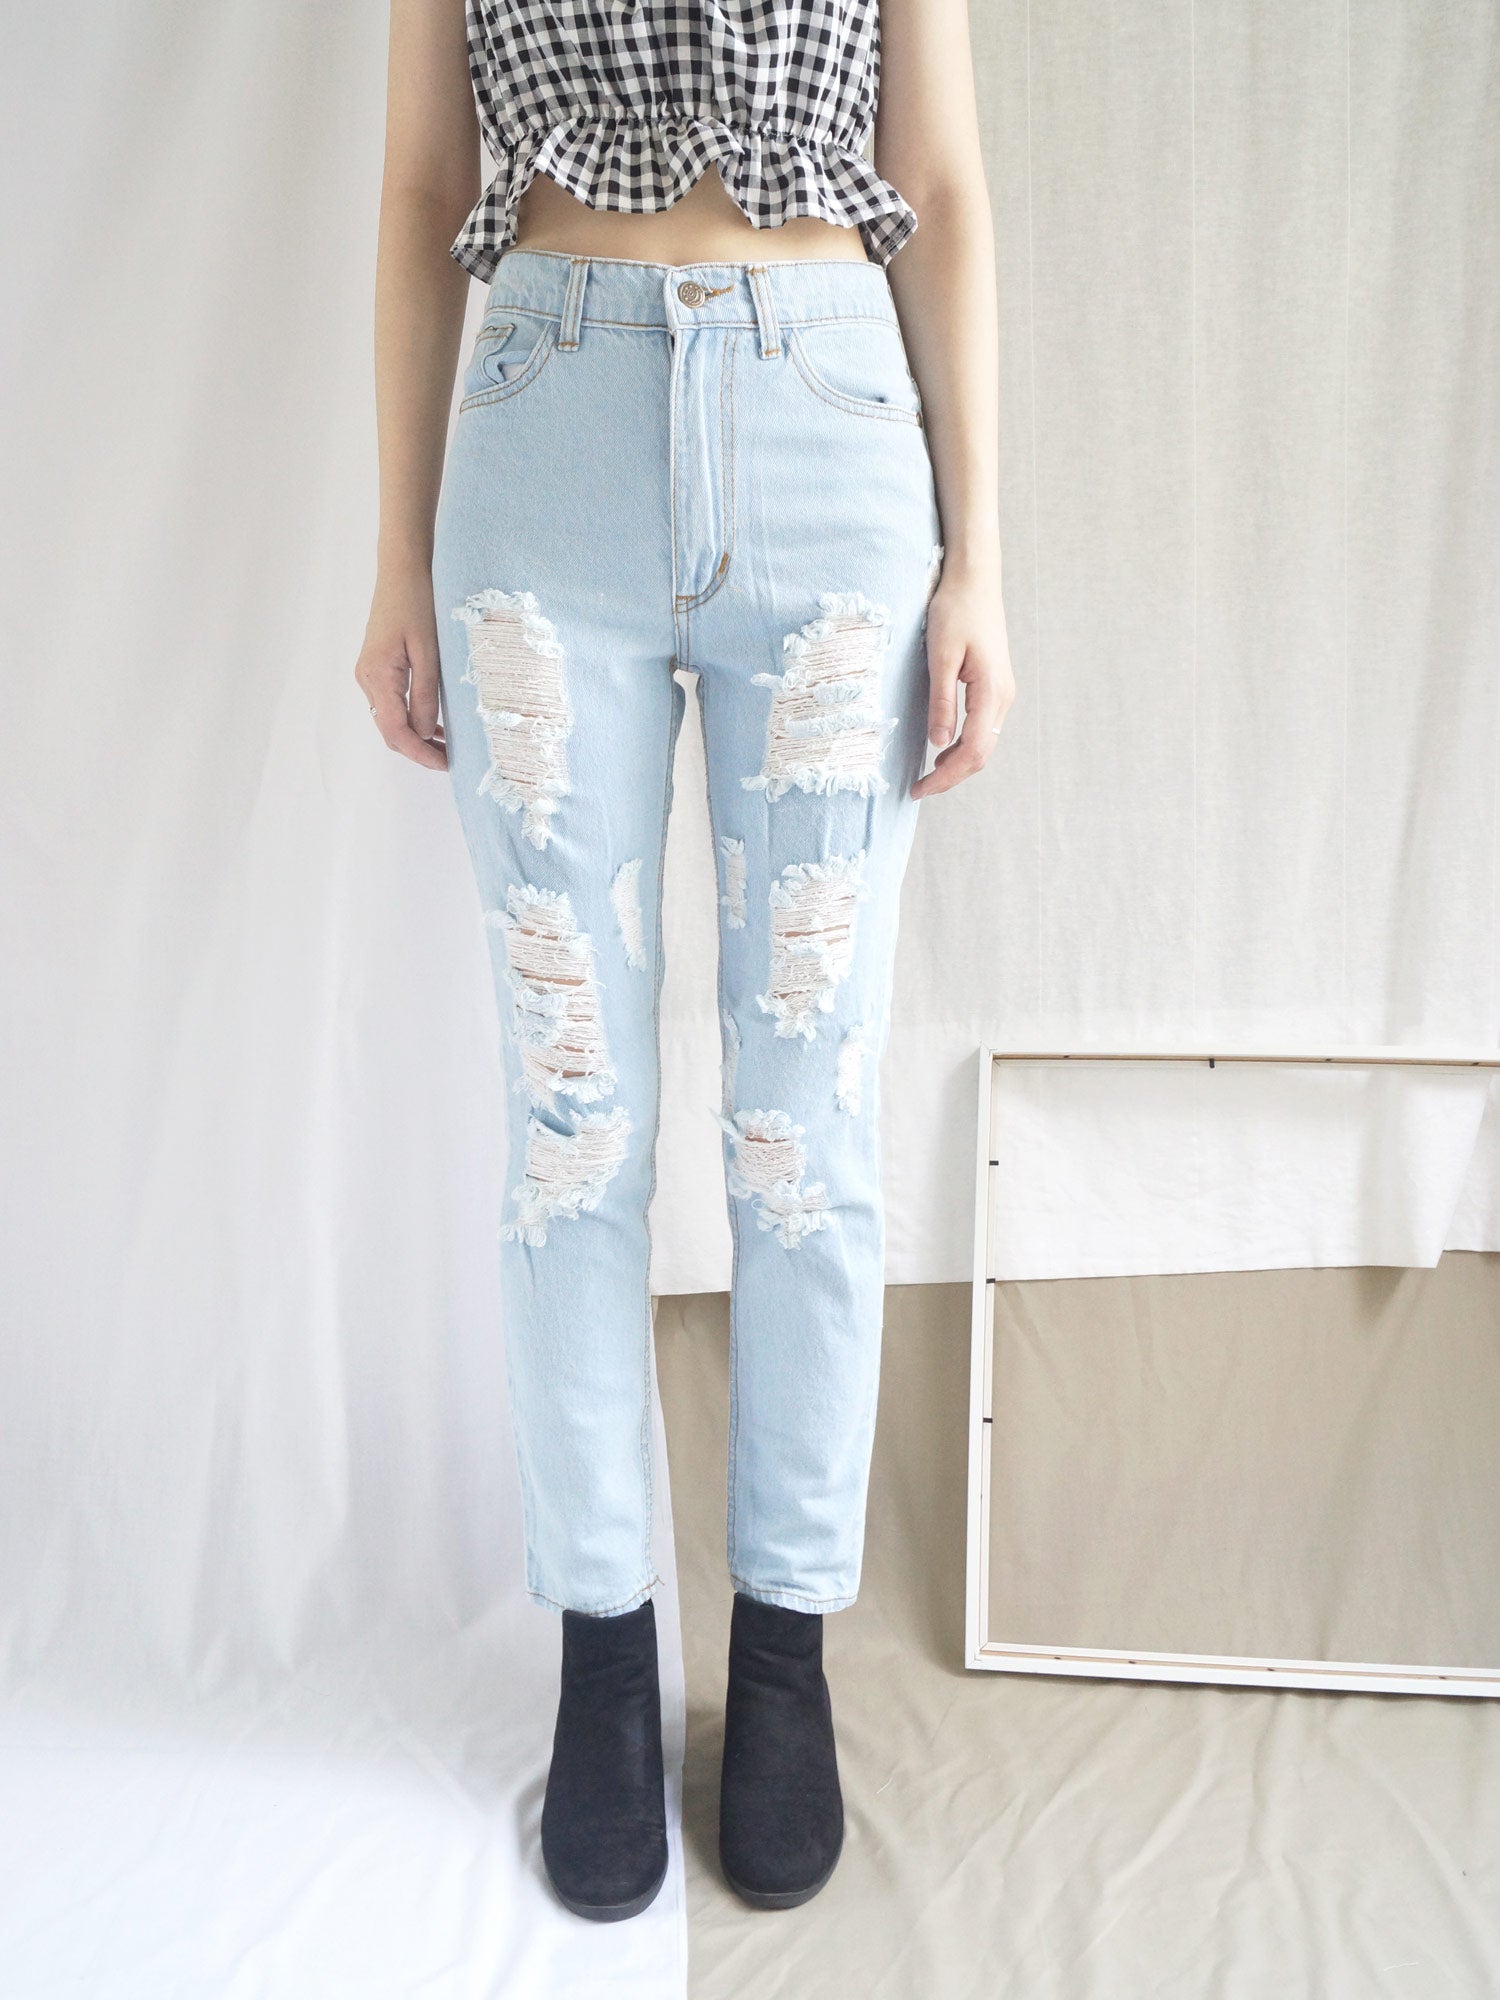 Ripped Jeans - Gabi The Label